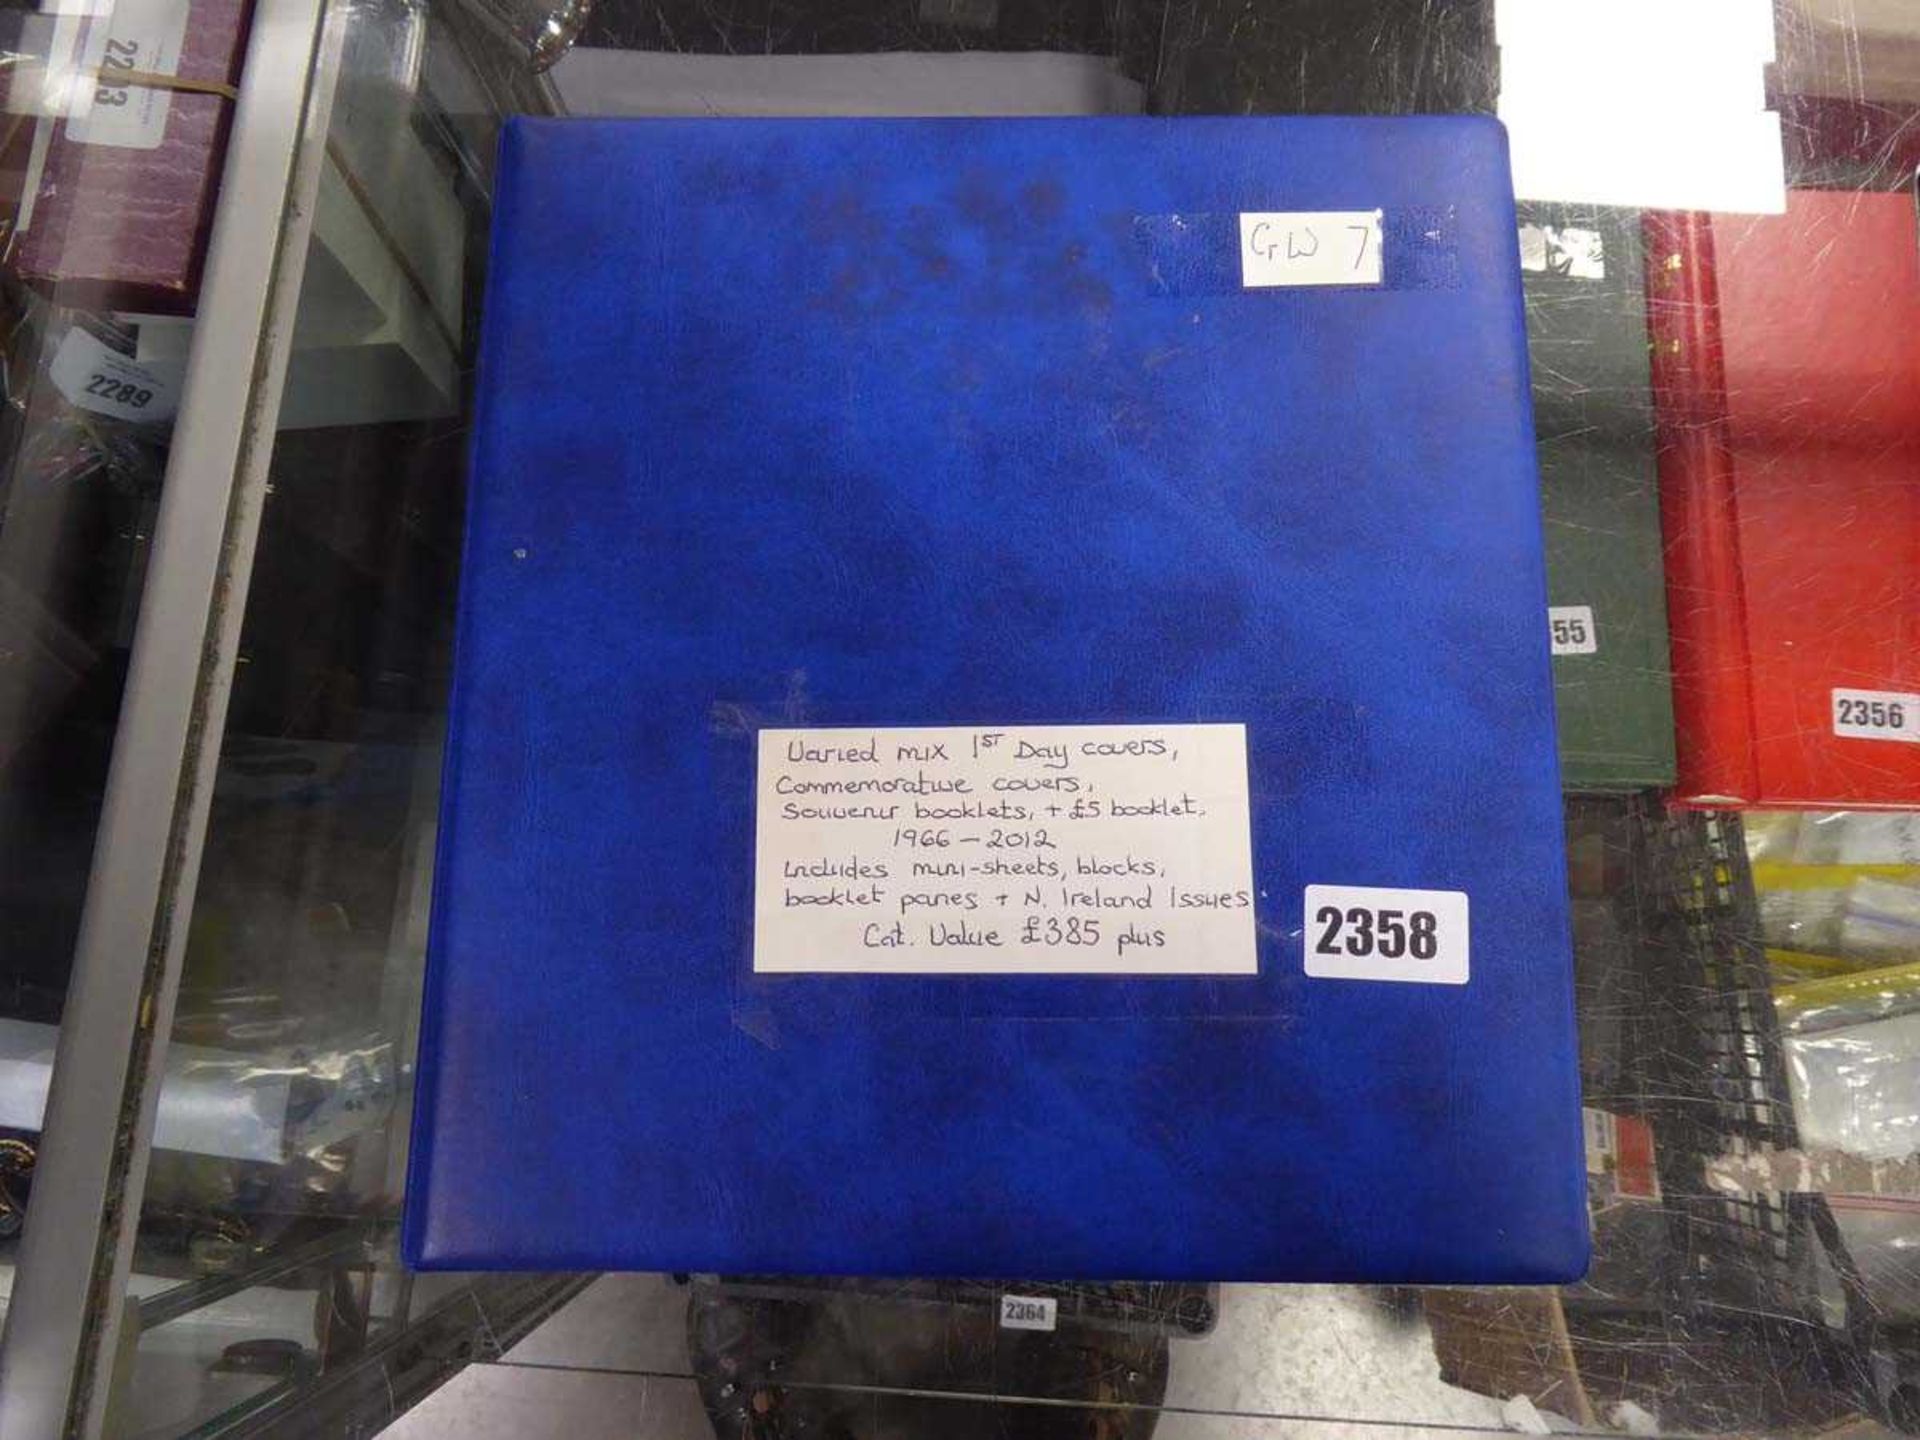 Varied mix of first day covers, commemorative covers in blue sotckbook